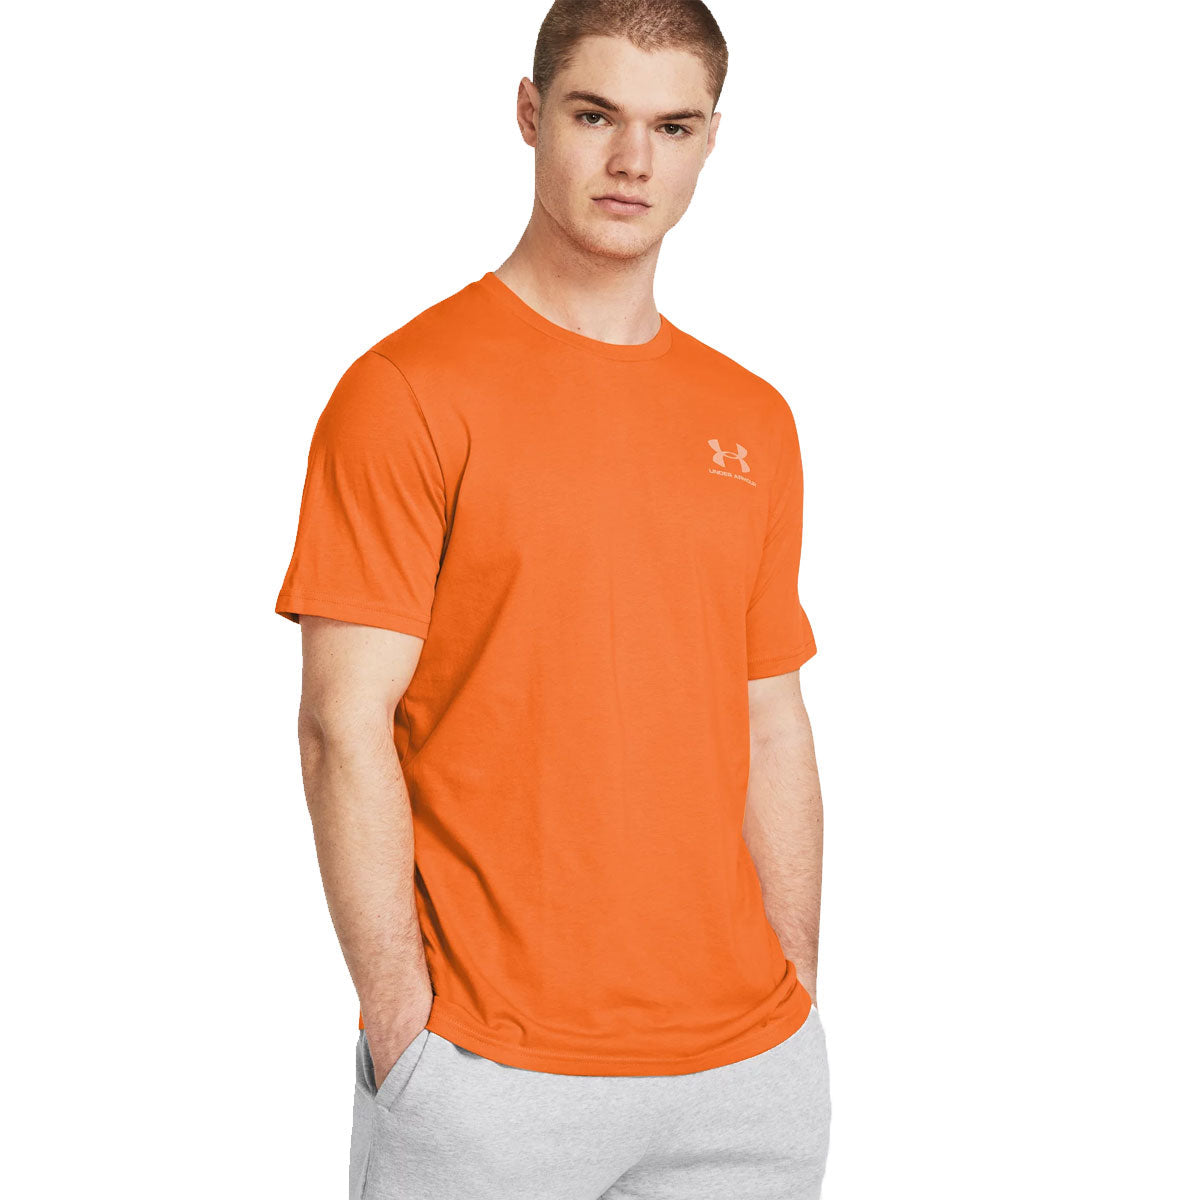 Under Armour Sportstyle Left Chest Short Sleeve Tee - Mens - Atomic/White